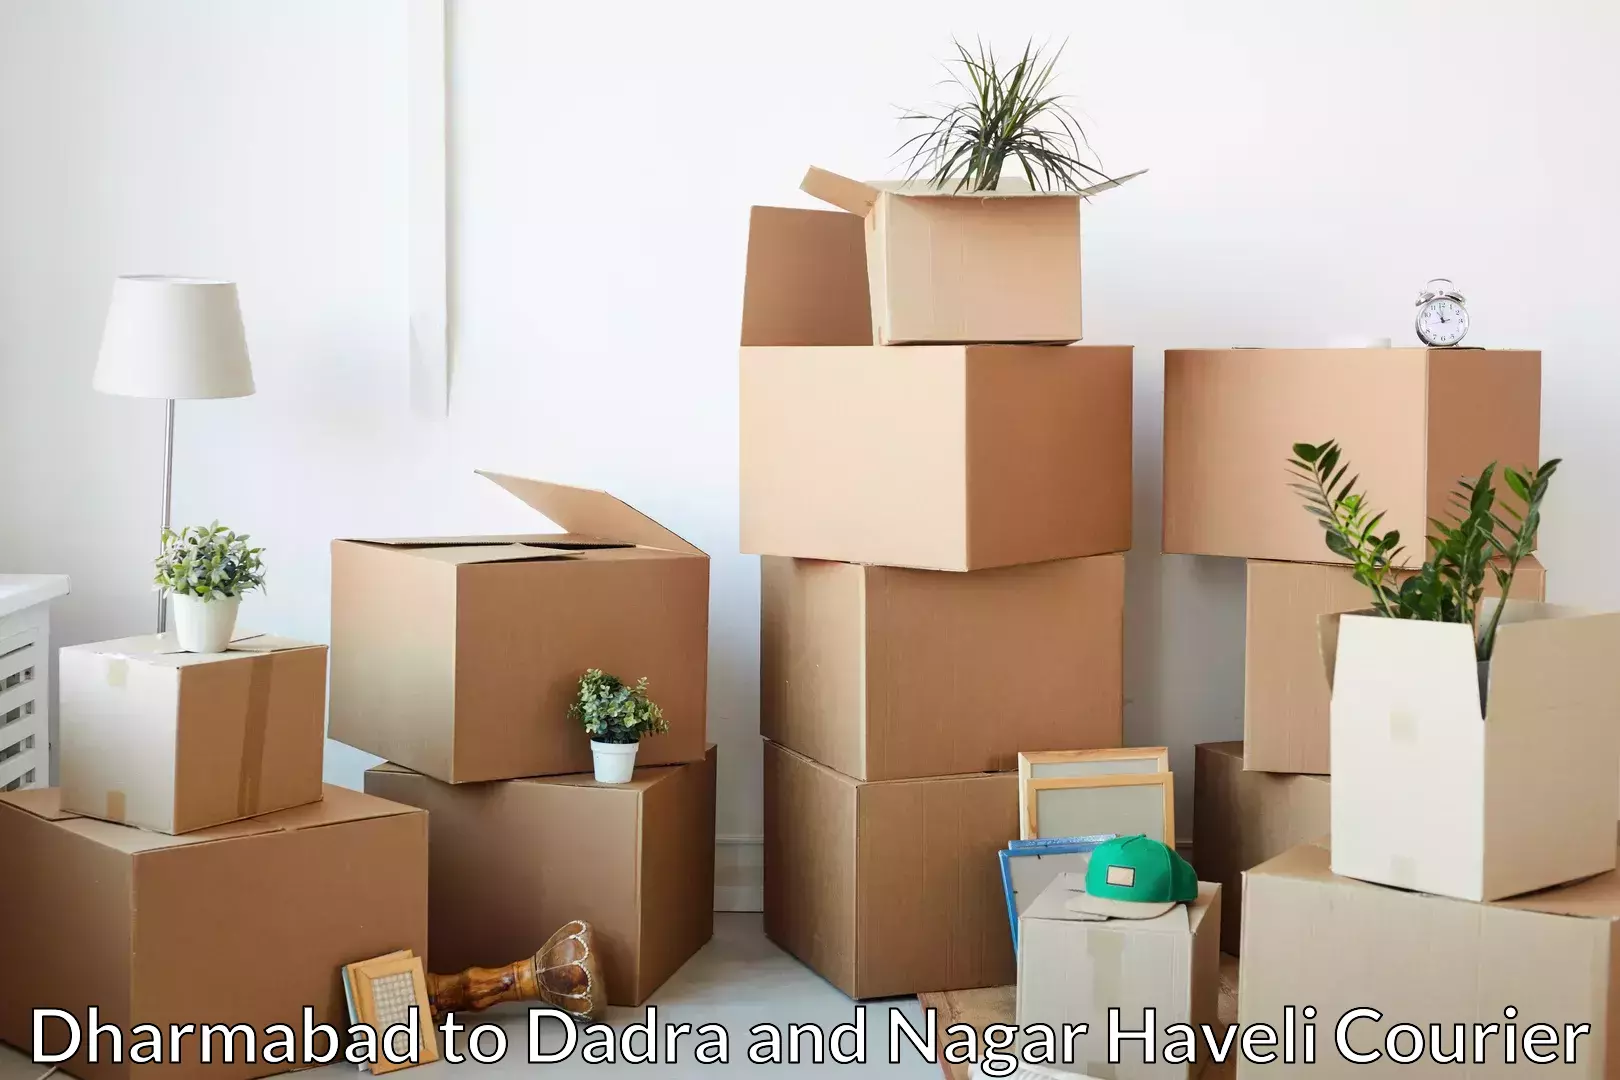 Professional movers in Dharmabad to Dadra and Nagar Haveli